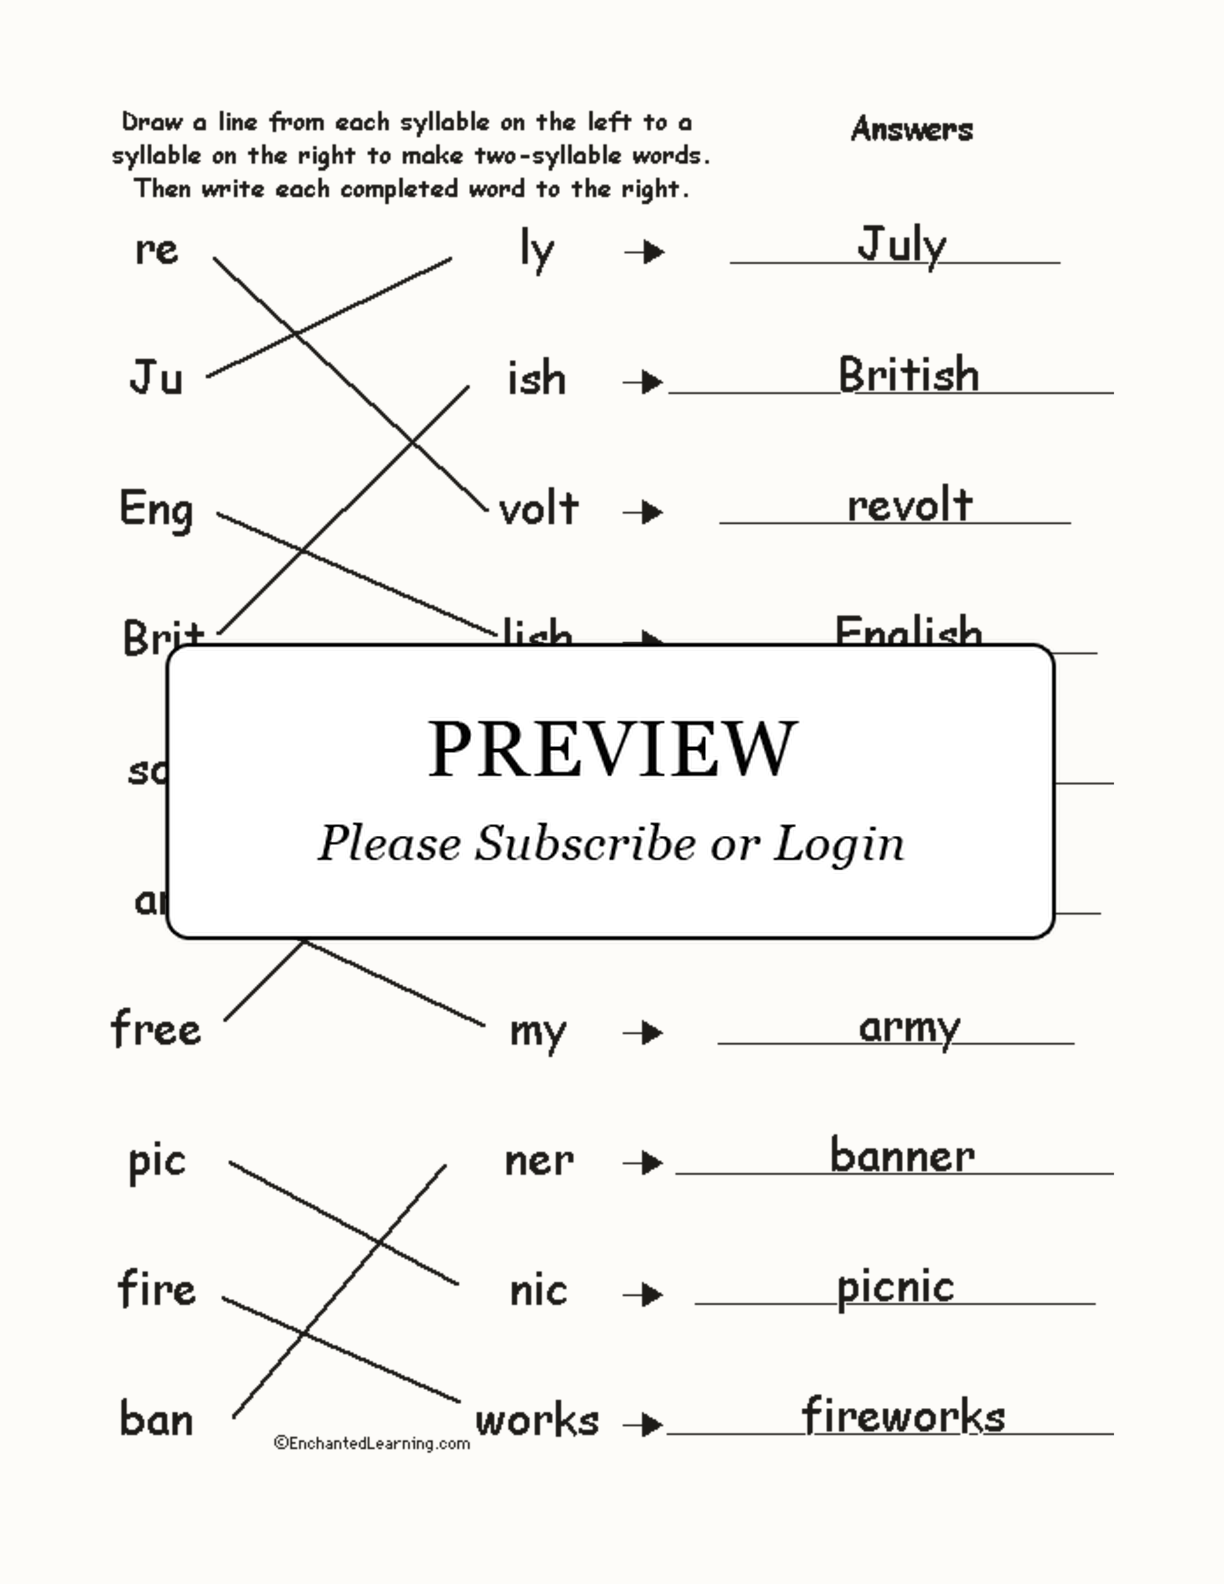 Match the Syllables: July 4th-related Words interactive worksheet page 2